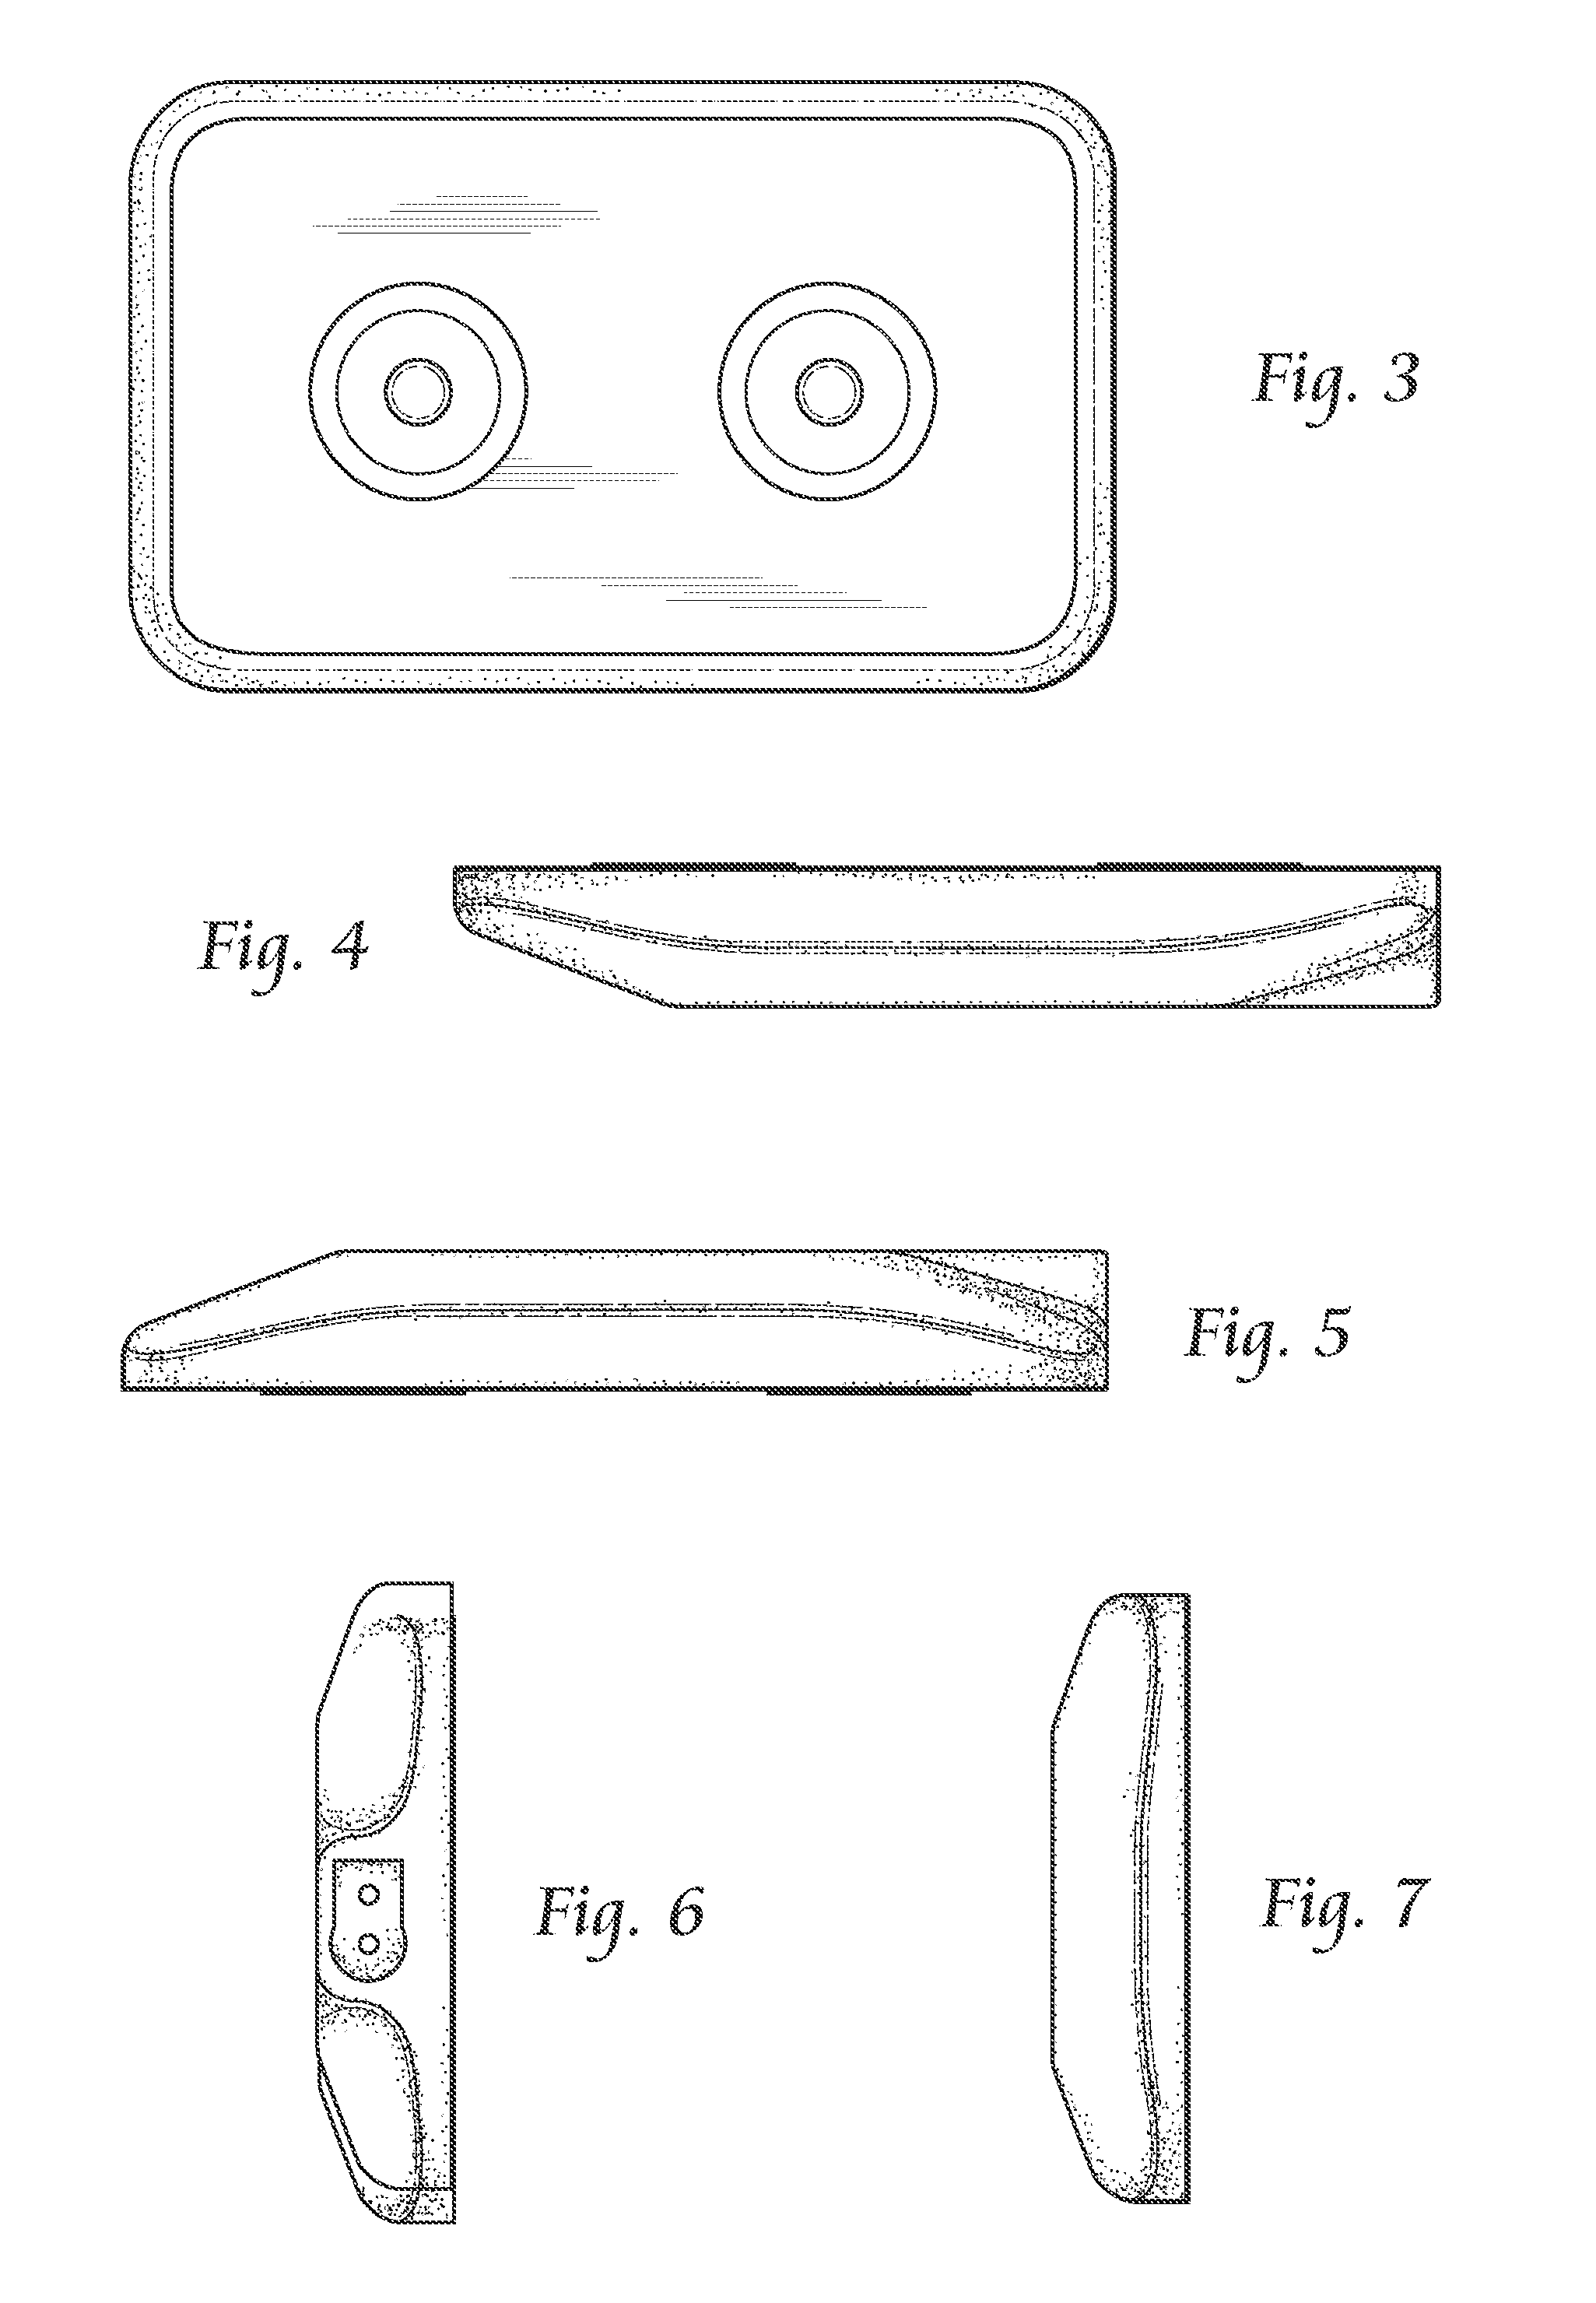 Systems and Methods for Providing Percutaneous Electrical Stimulation